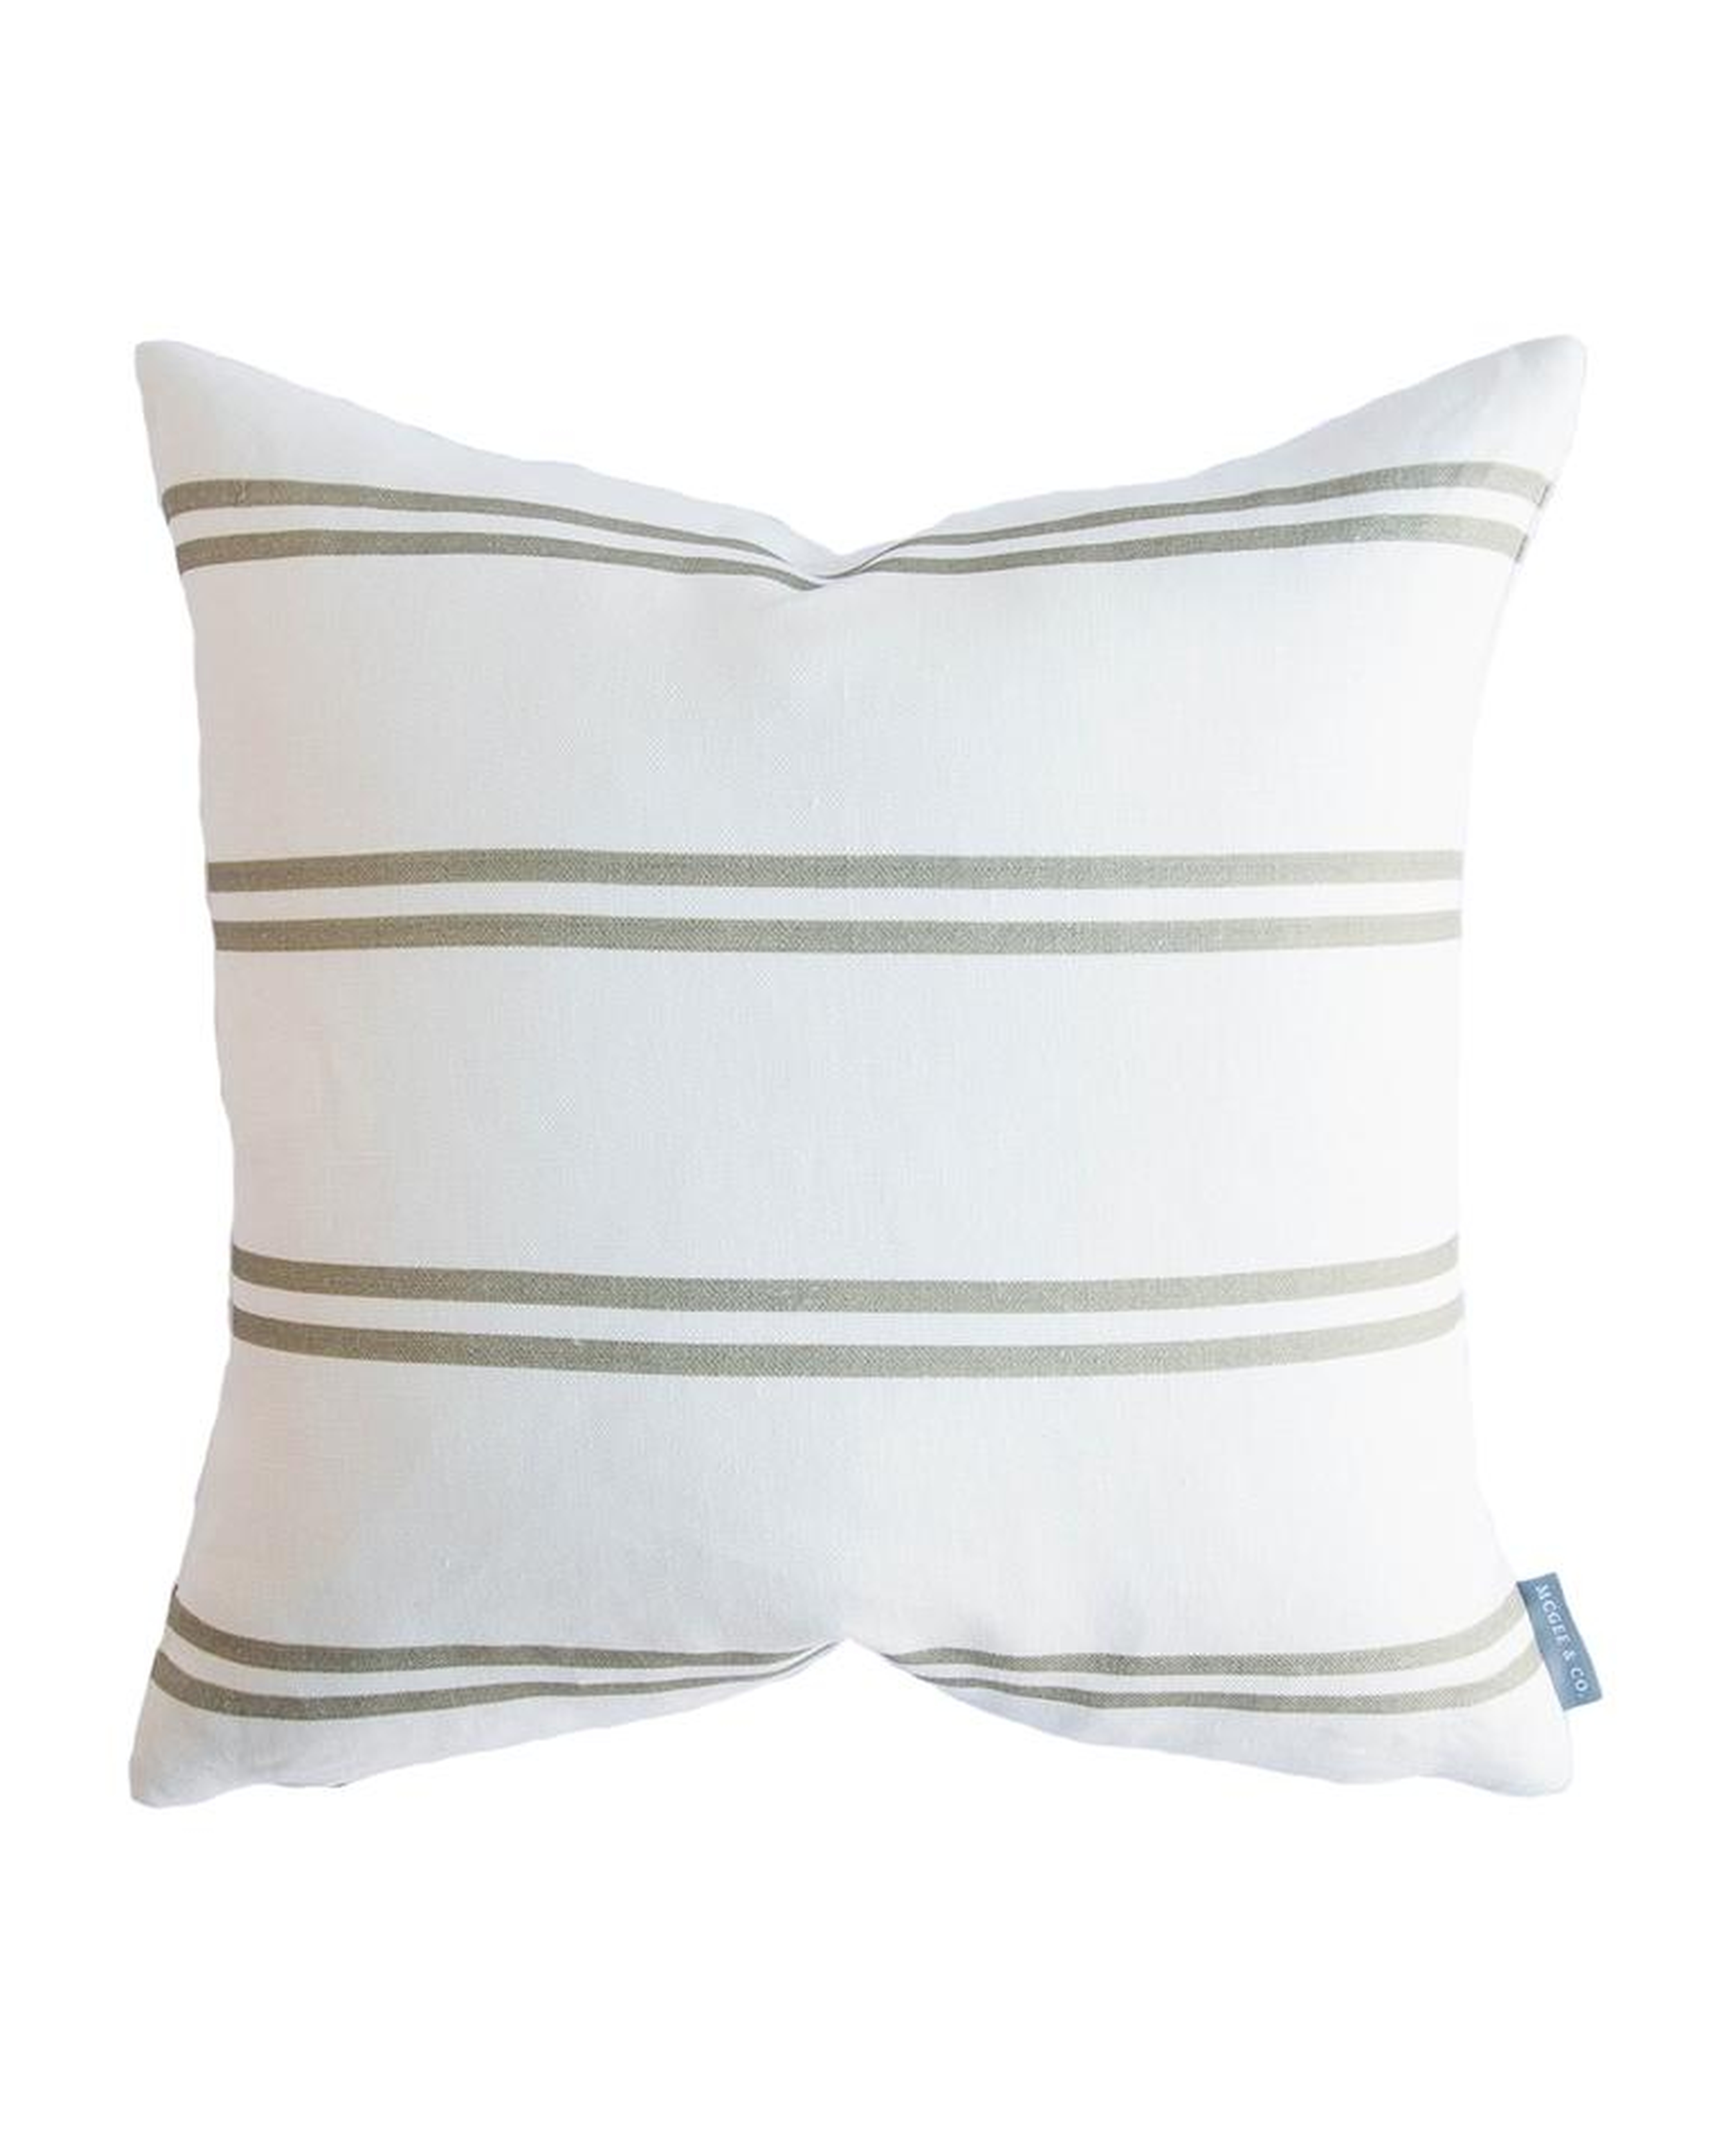 FRANKLIN OLIVE STRIPE PILLOW WITHOUT INSERT, 22" x 22" - McGee & Co.